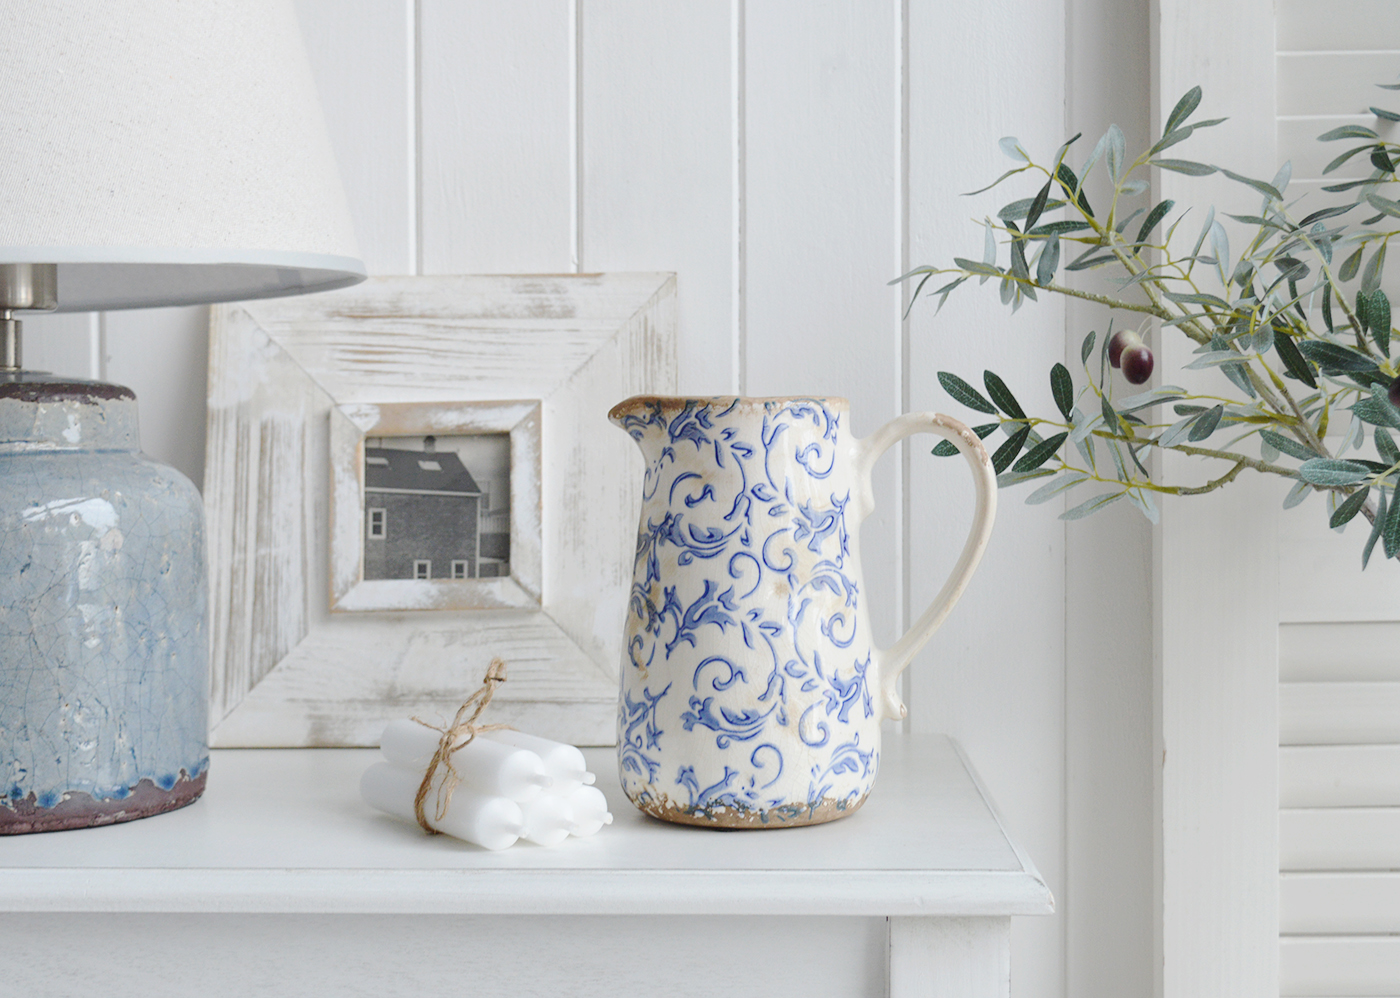 The Prospect vintage blue and white ceramic vase, perfect in a coastal setting